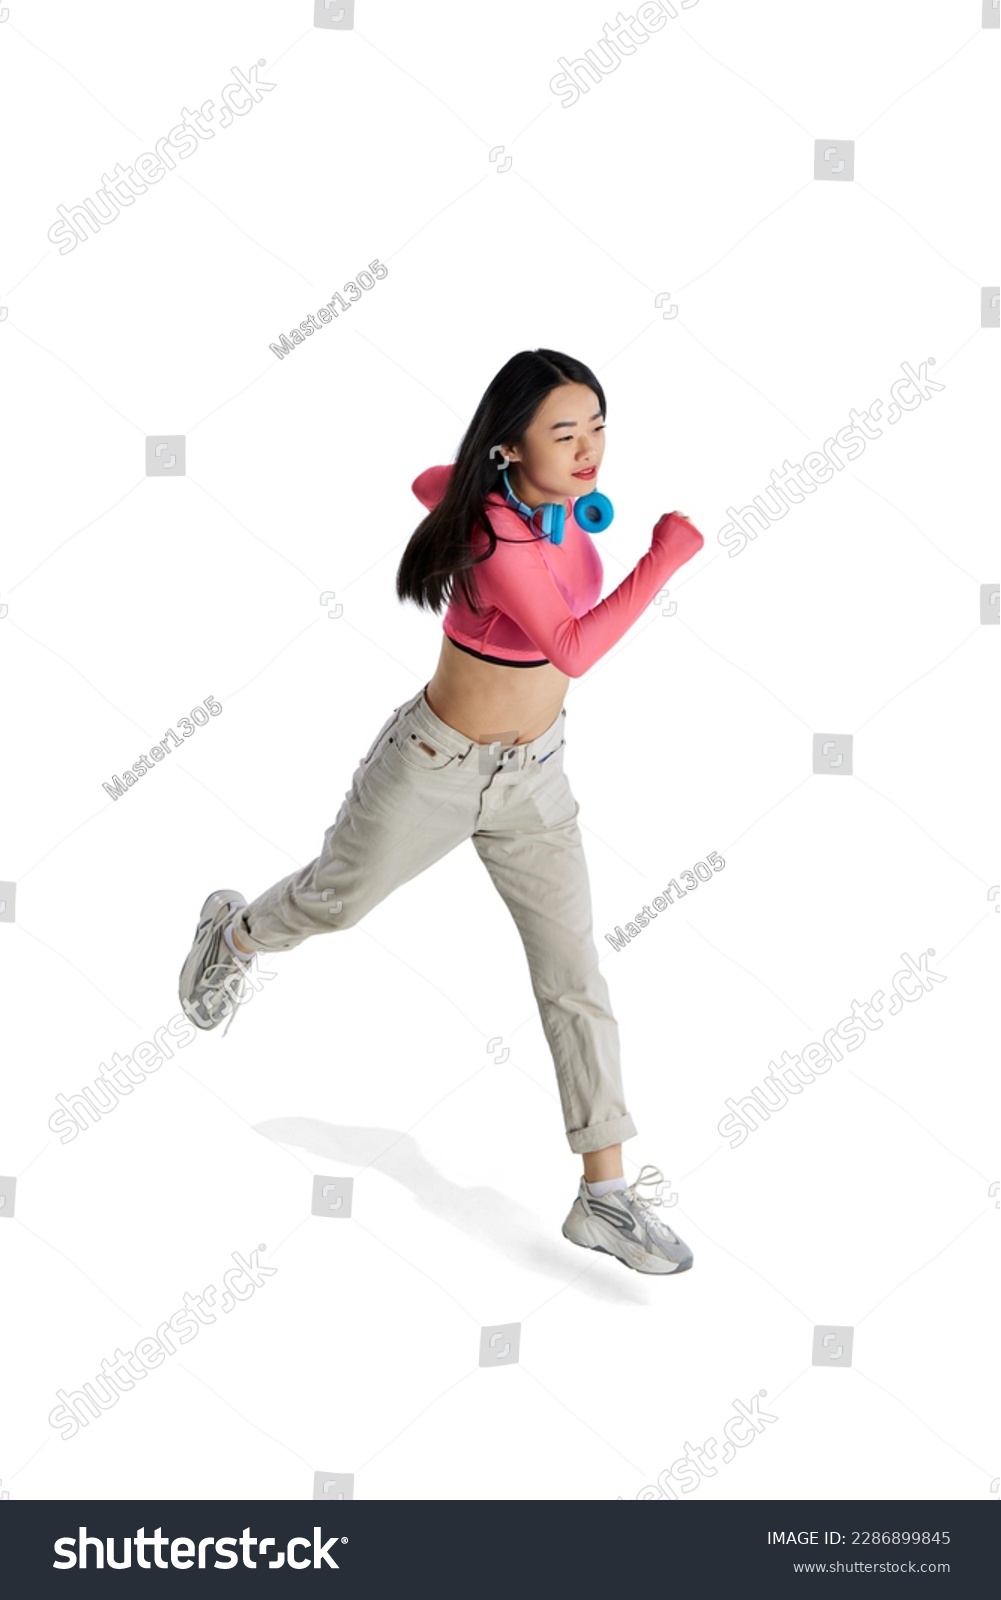 Top isometric view. Young girl with headphones in casual clothes in motion, running isolated over white background. Concept of business, employment, education. lifestyle. Copy space for ad #2286899845